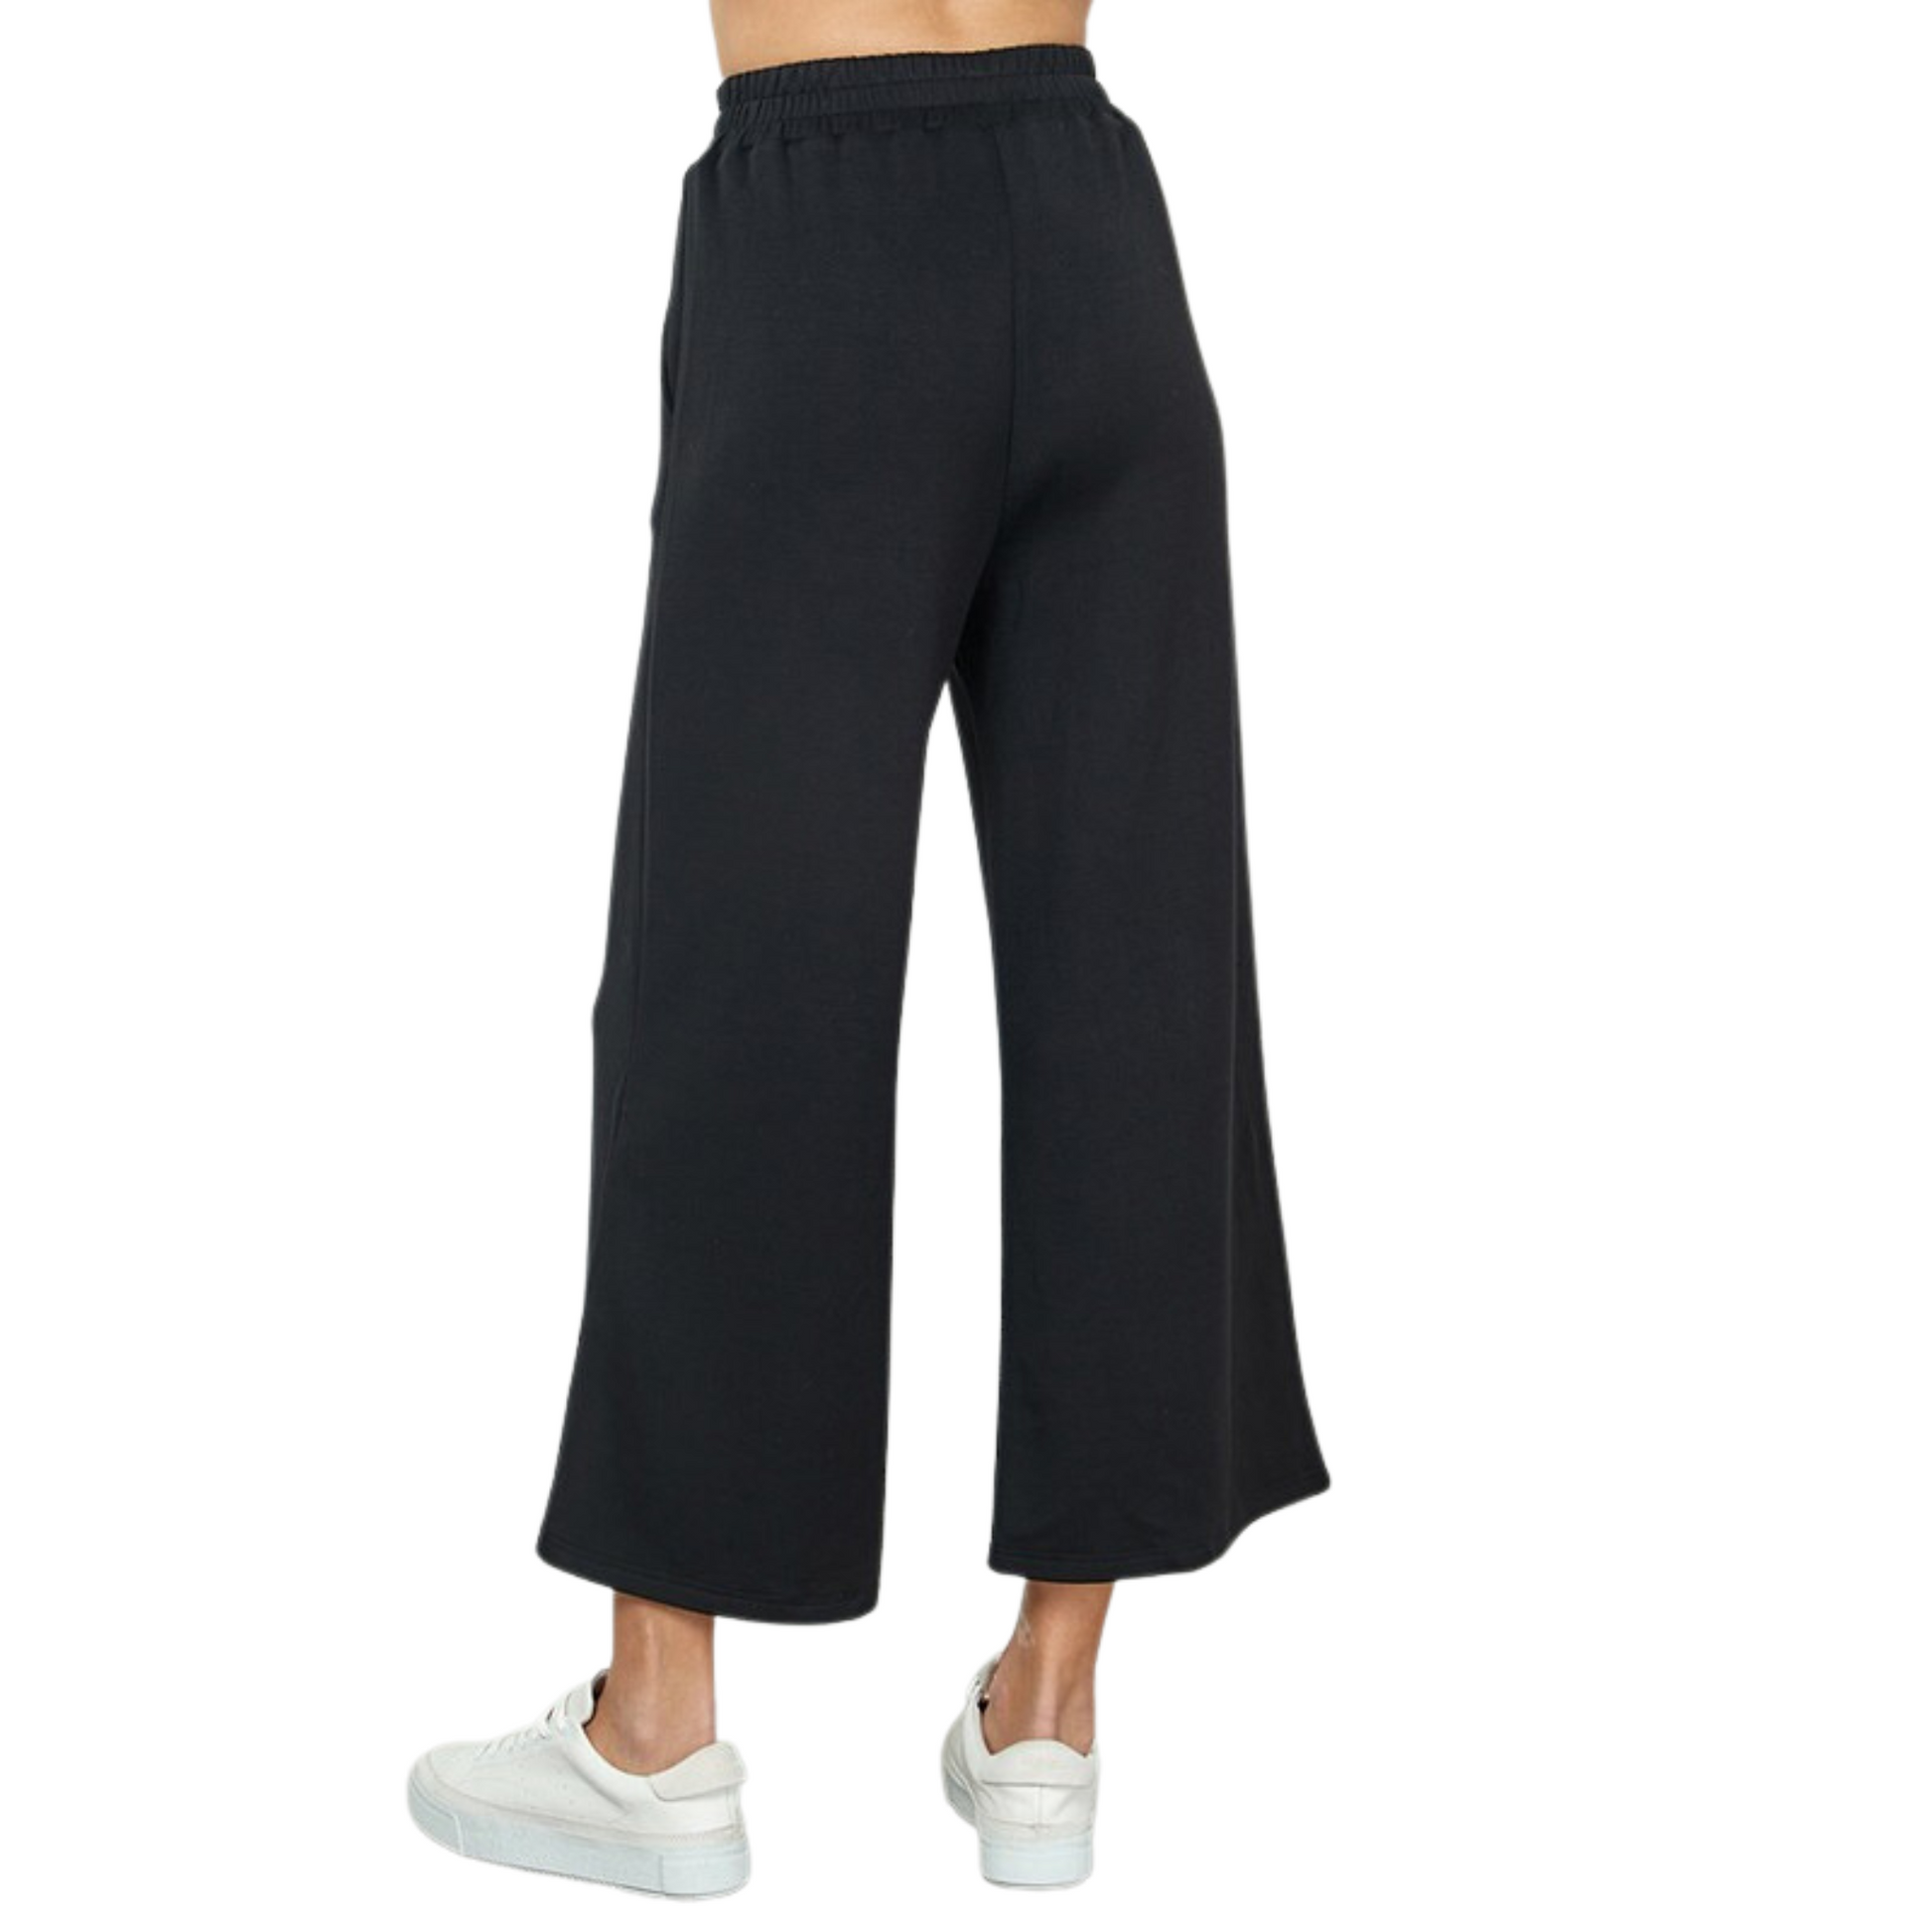 Our Plus size Cropped Wide Leg Pants are perfect for any occasion. Featuring a classic black color and super soft fabric, these pants have a flattering high waist and wide leg, providing a flexible, comfortable fit. They are cropped just above the ankle for a modern look.